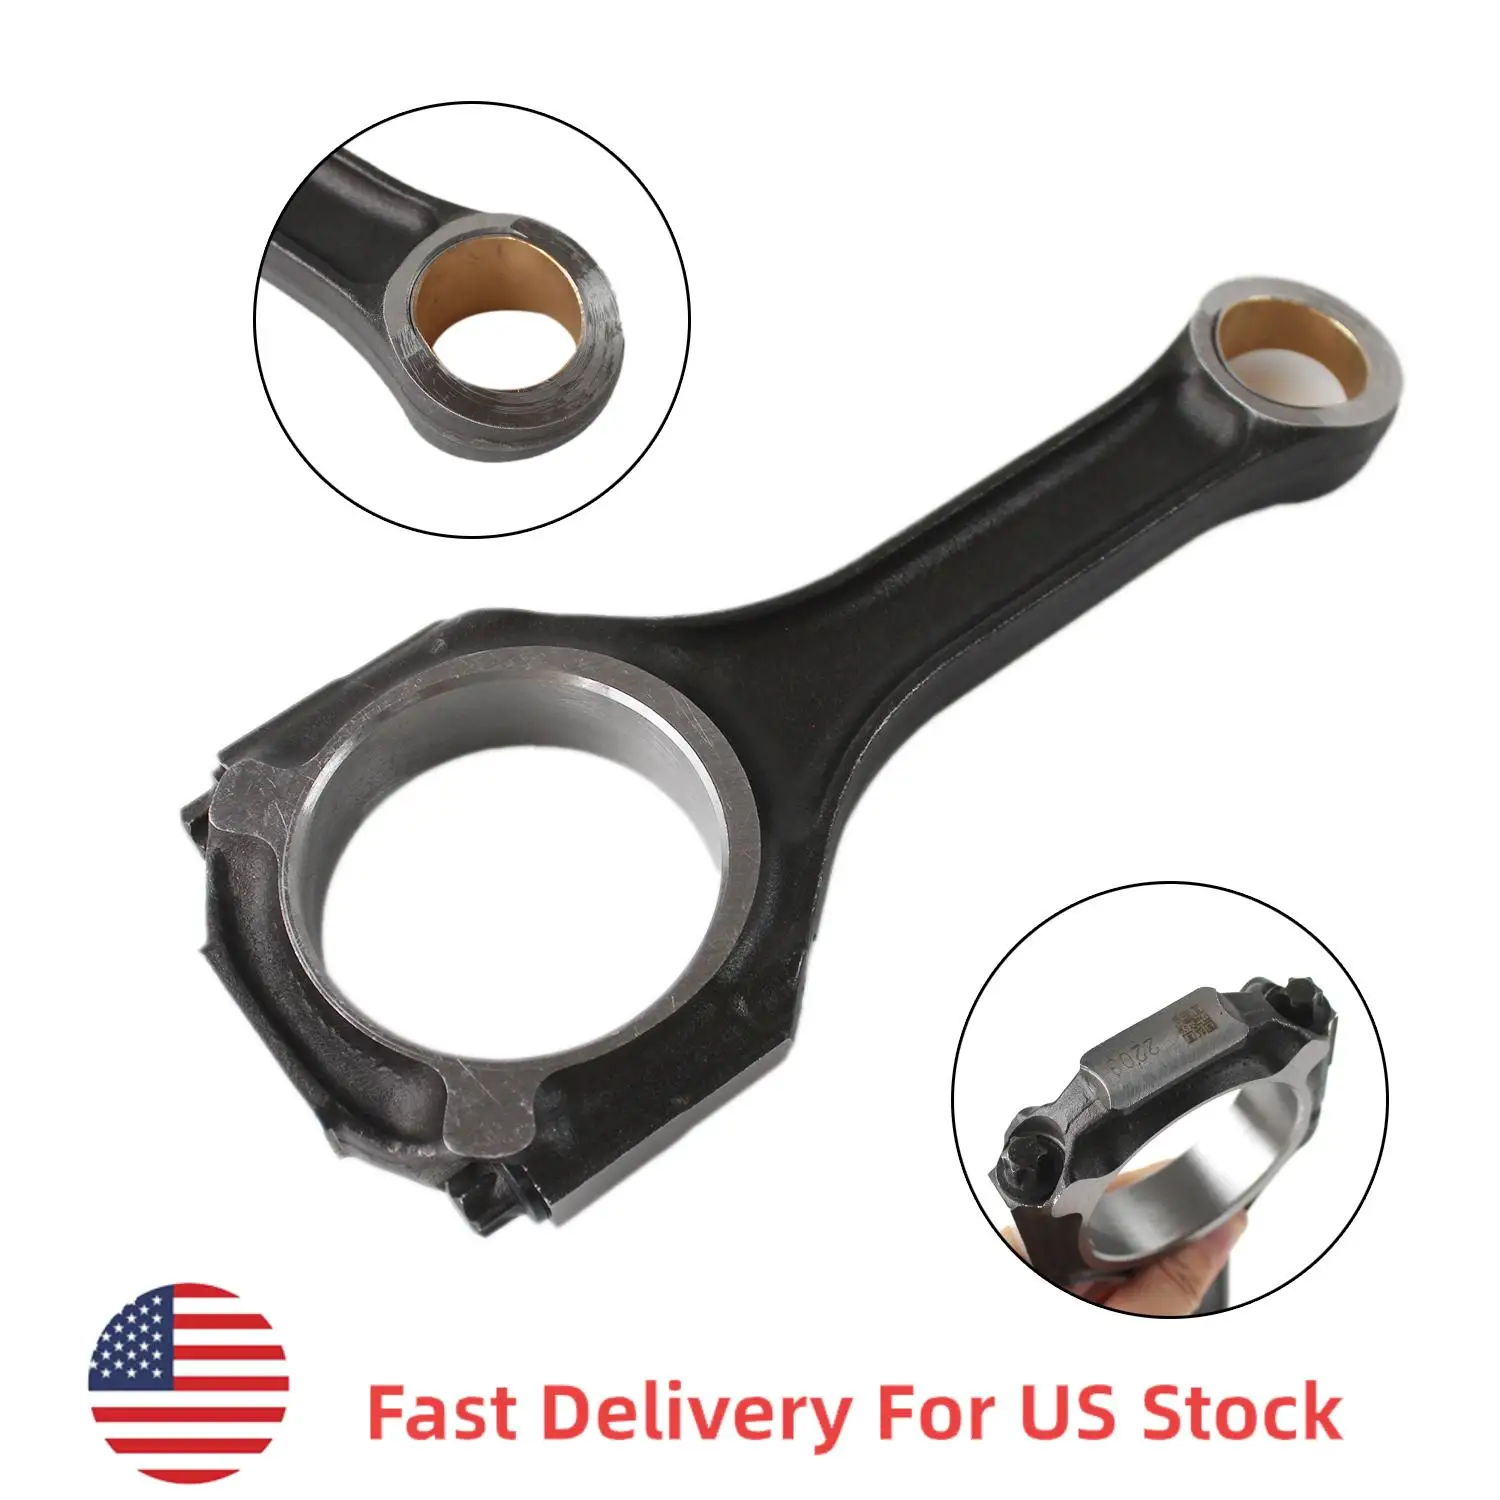 

Connecting Rod M157 M278 2780300320 For Mercedes-Benz S500 W221 GL500 CLS500 ML500 SL550 E63 G63 E550 4.6 4.7 5.5 V8 Car Parts